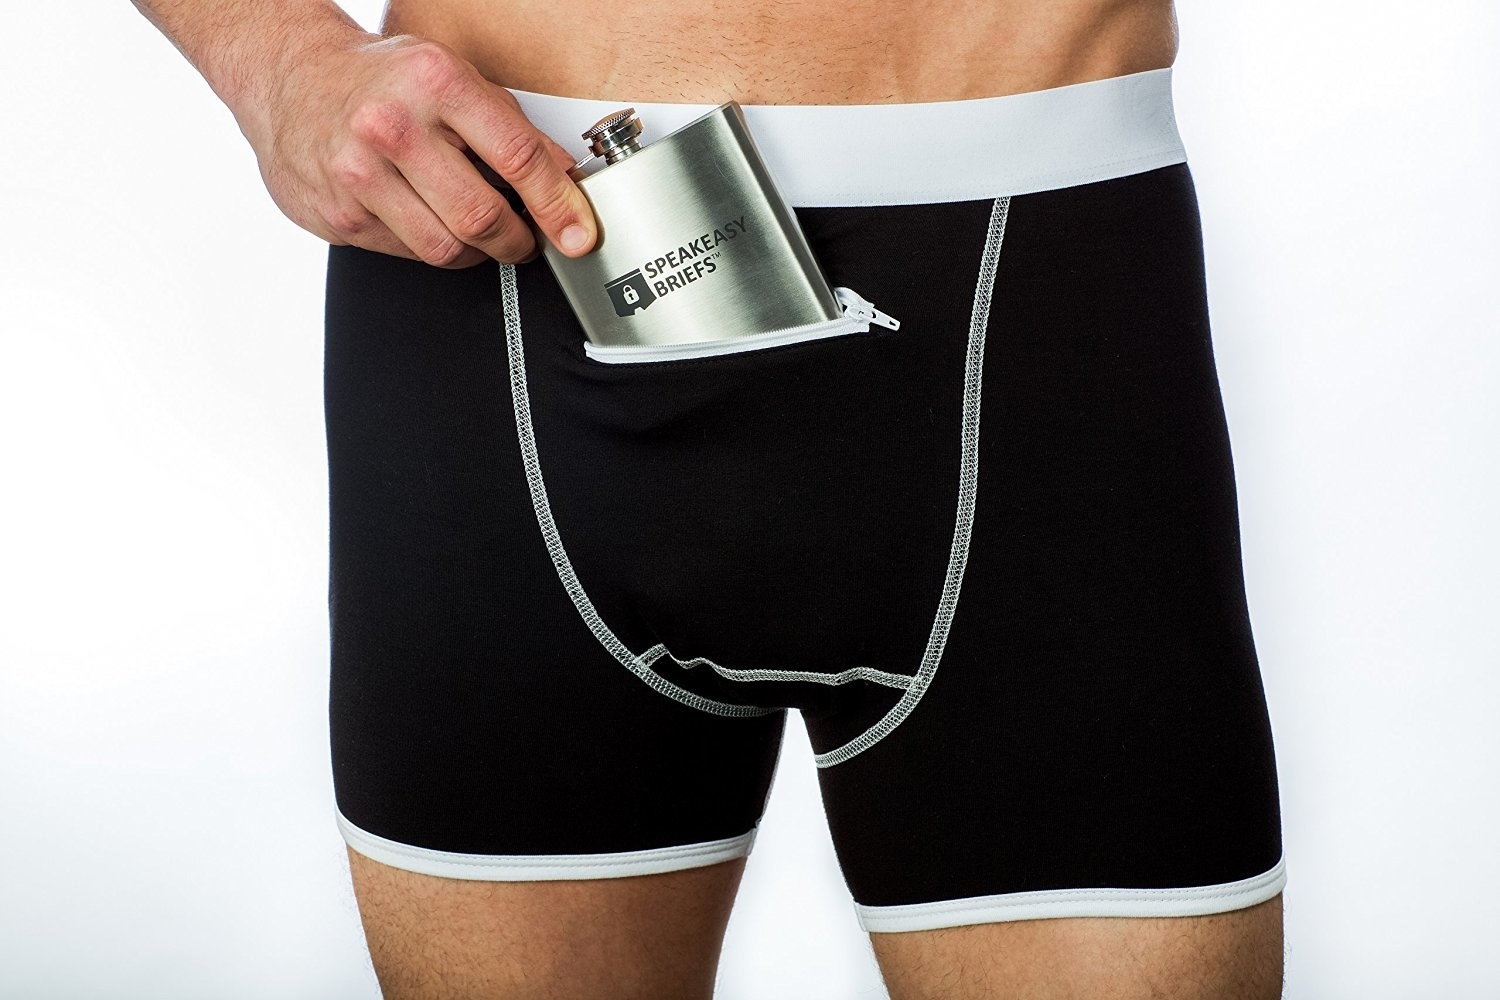 Or is it just. underwear that you can hide a flask. 